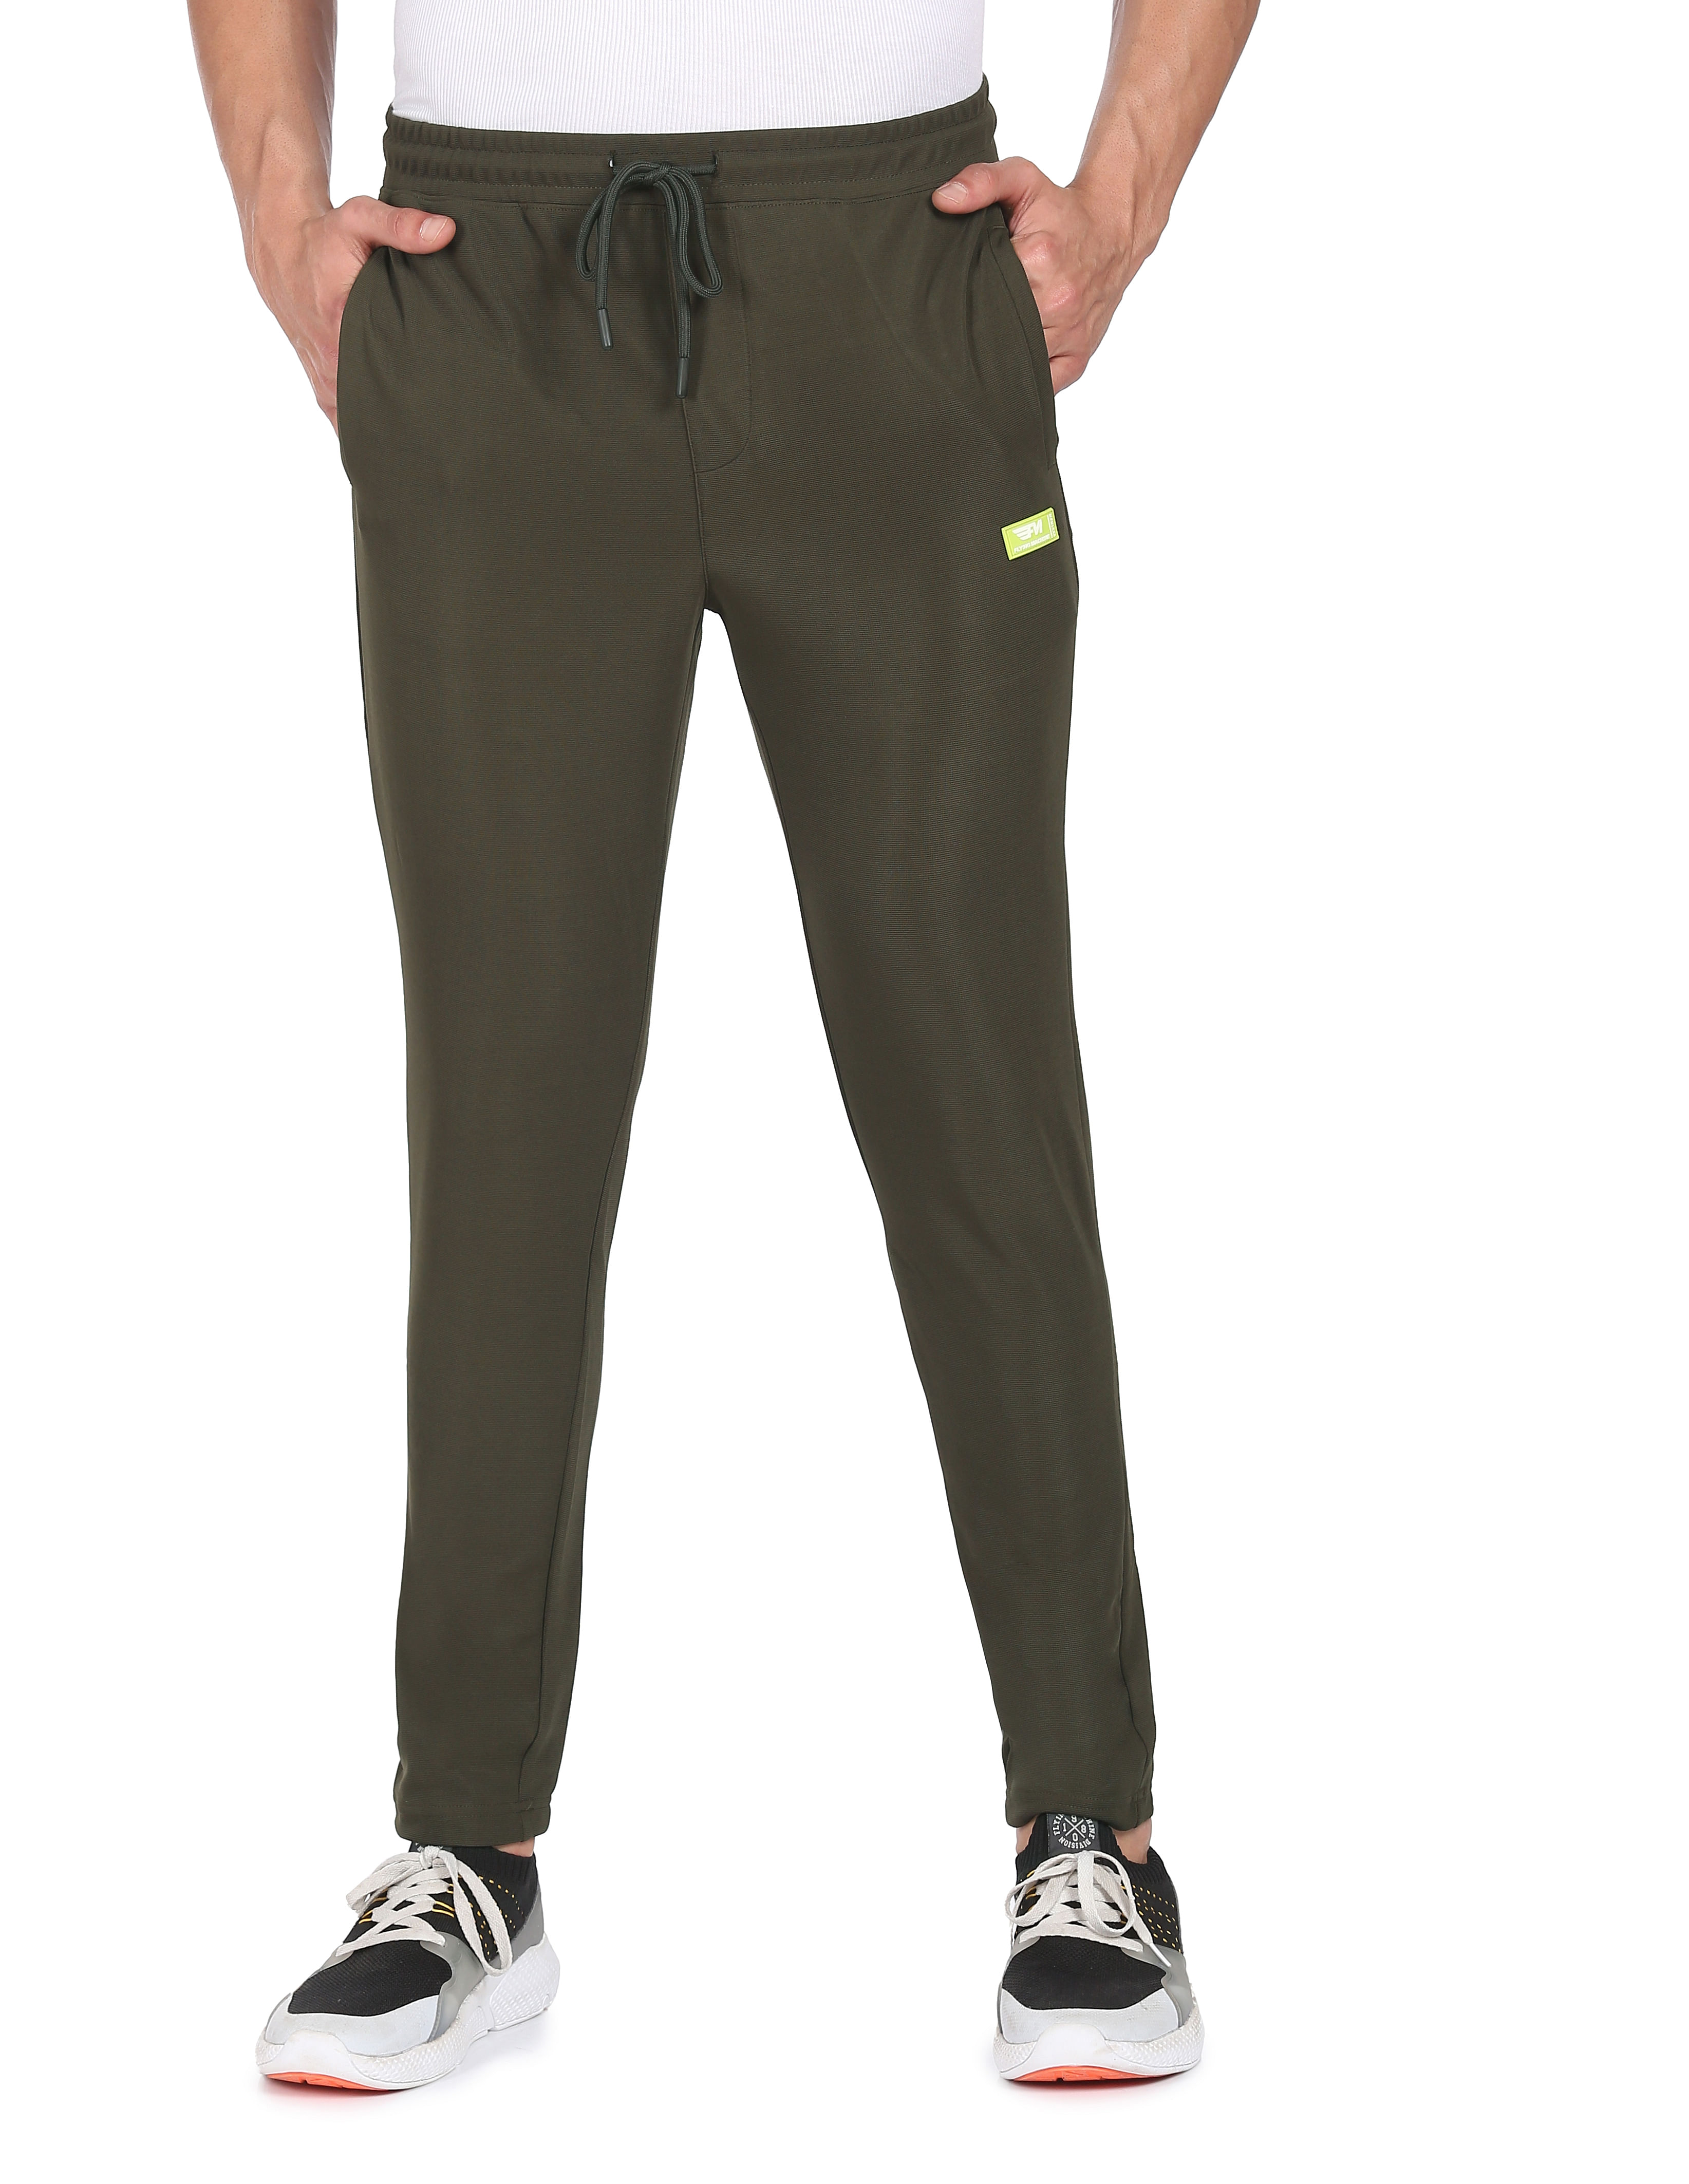 Best Rated and Reviewed in Mens Workout Pants - Walmart.com